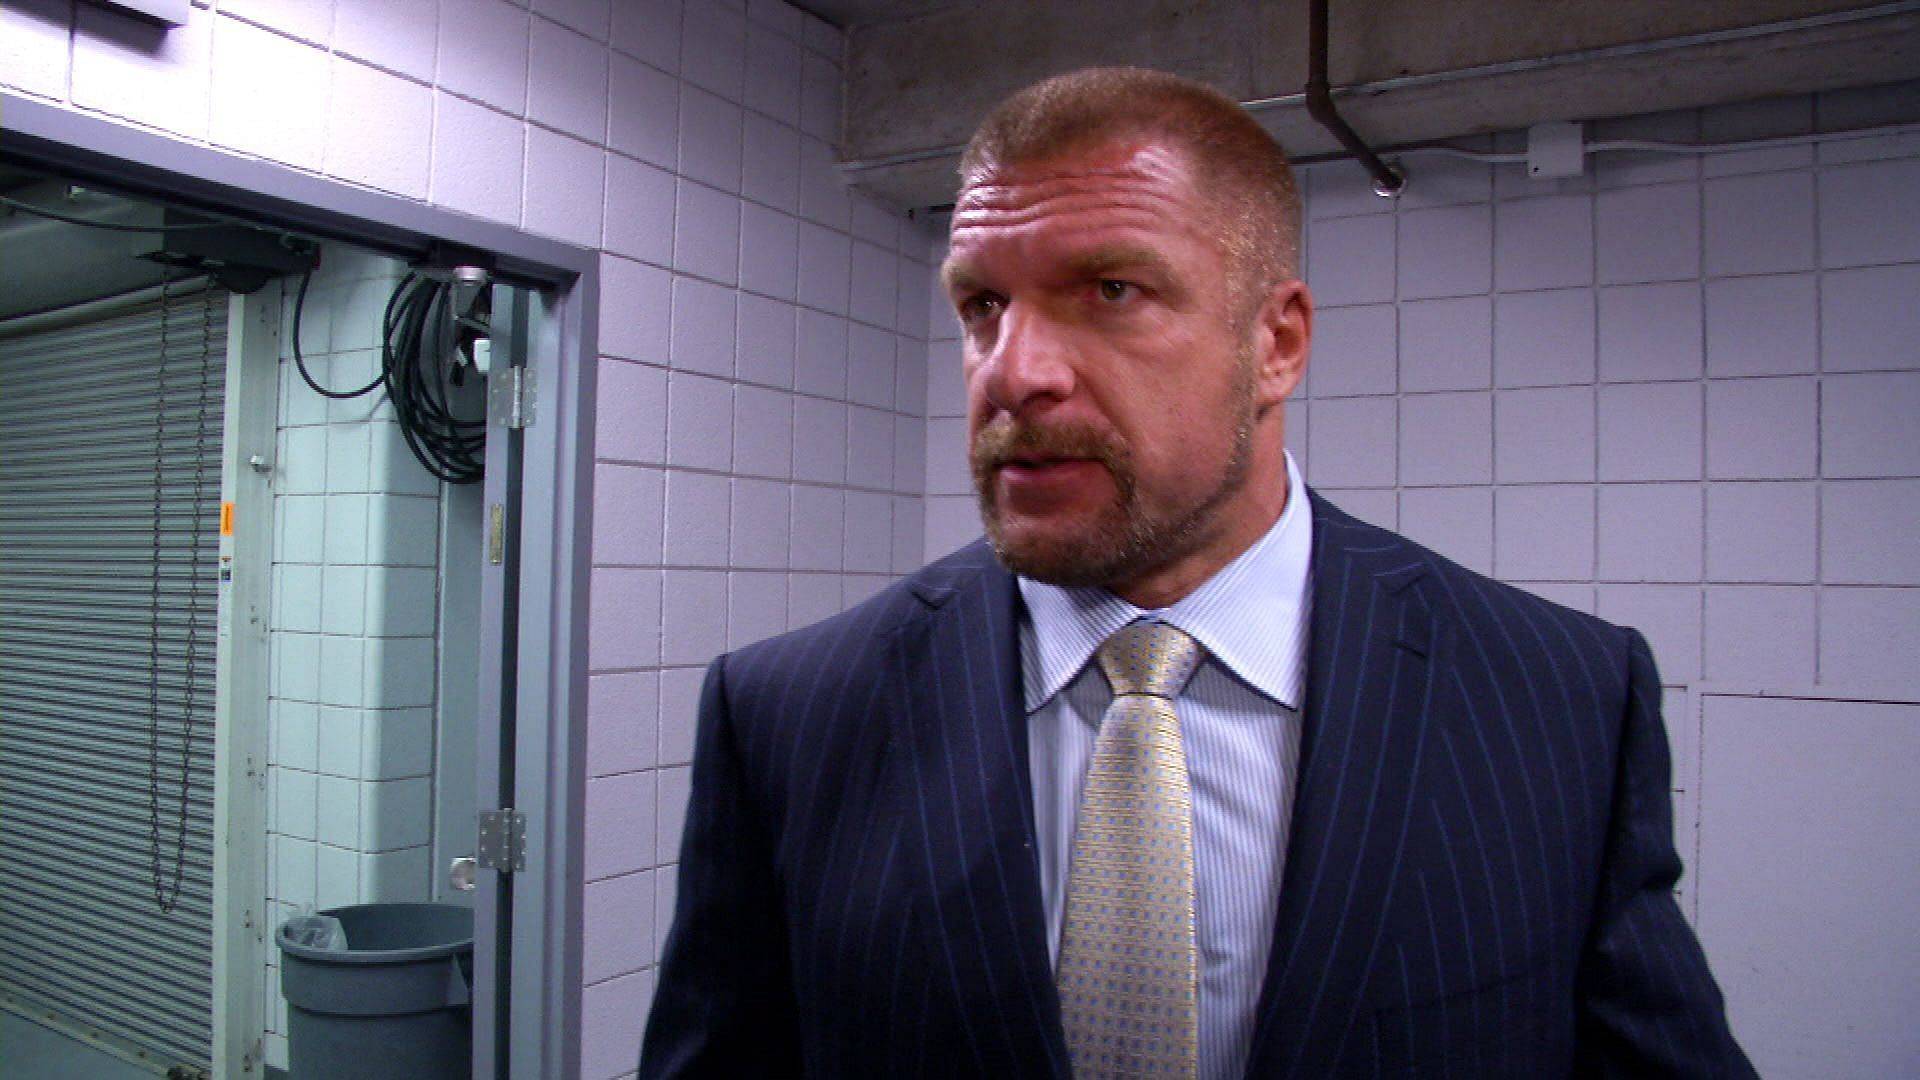 HHH has made several changes since assuming power in WWE.